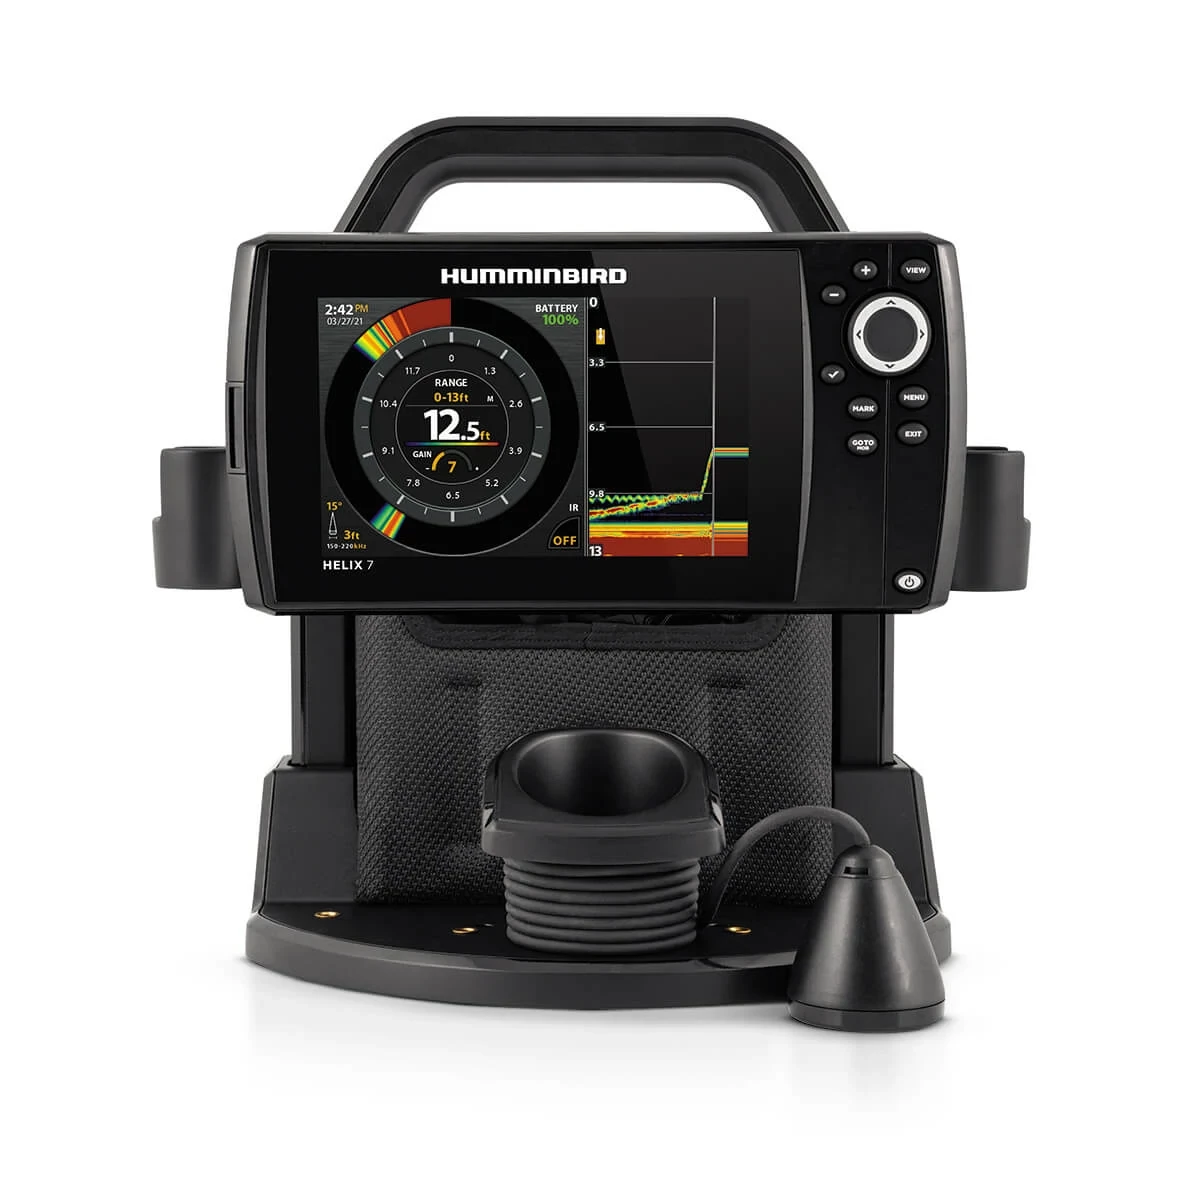 ICE HELIX 7 CHIRP GPS G4 shown with split flasher and 2D sonar screen